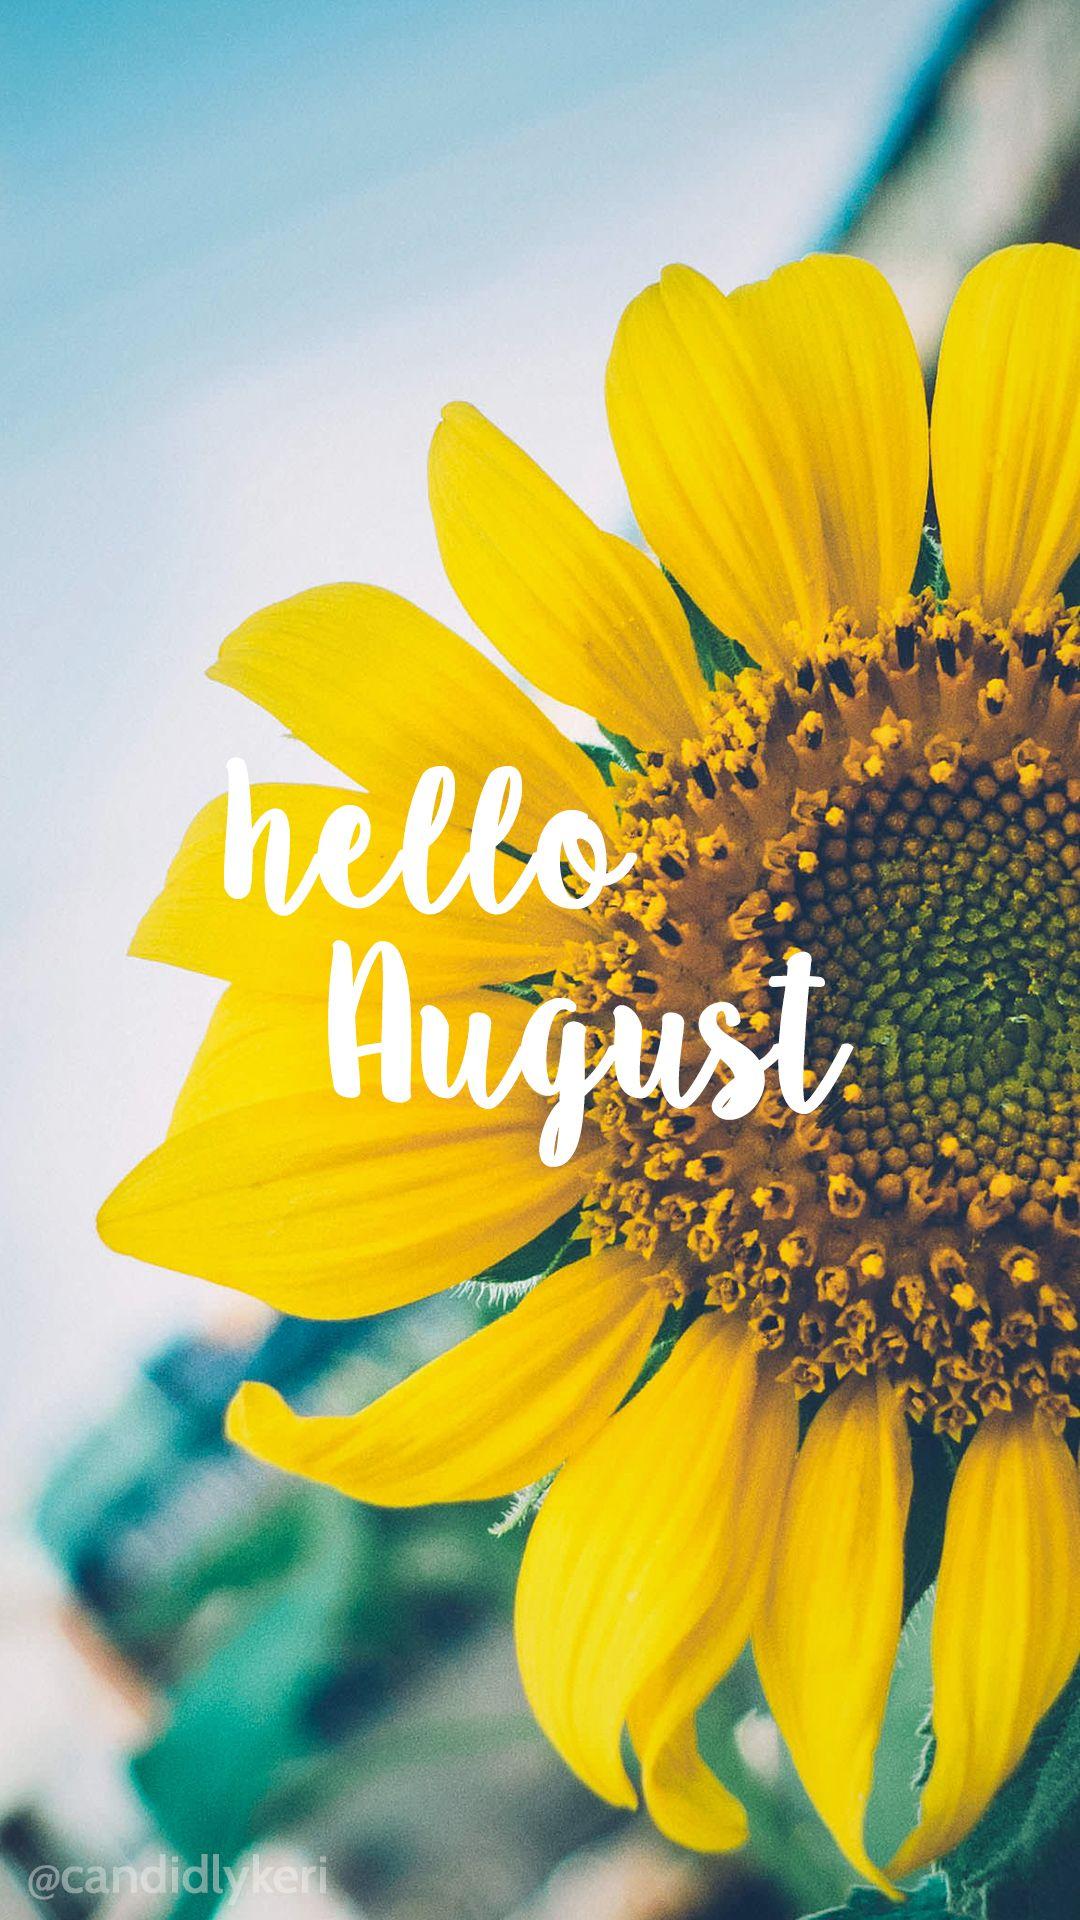 176900 August Stock Photos Pictures  RoyaltyFree Images  iStock   Summer Hello august September